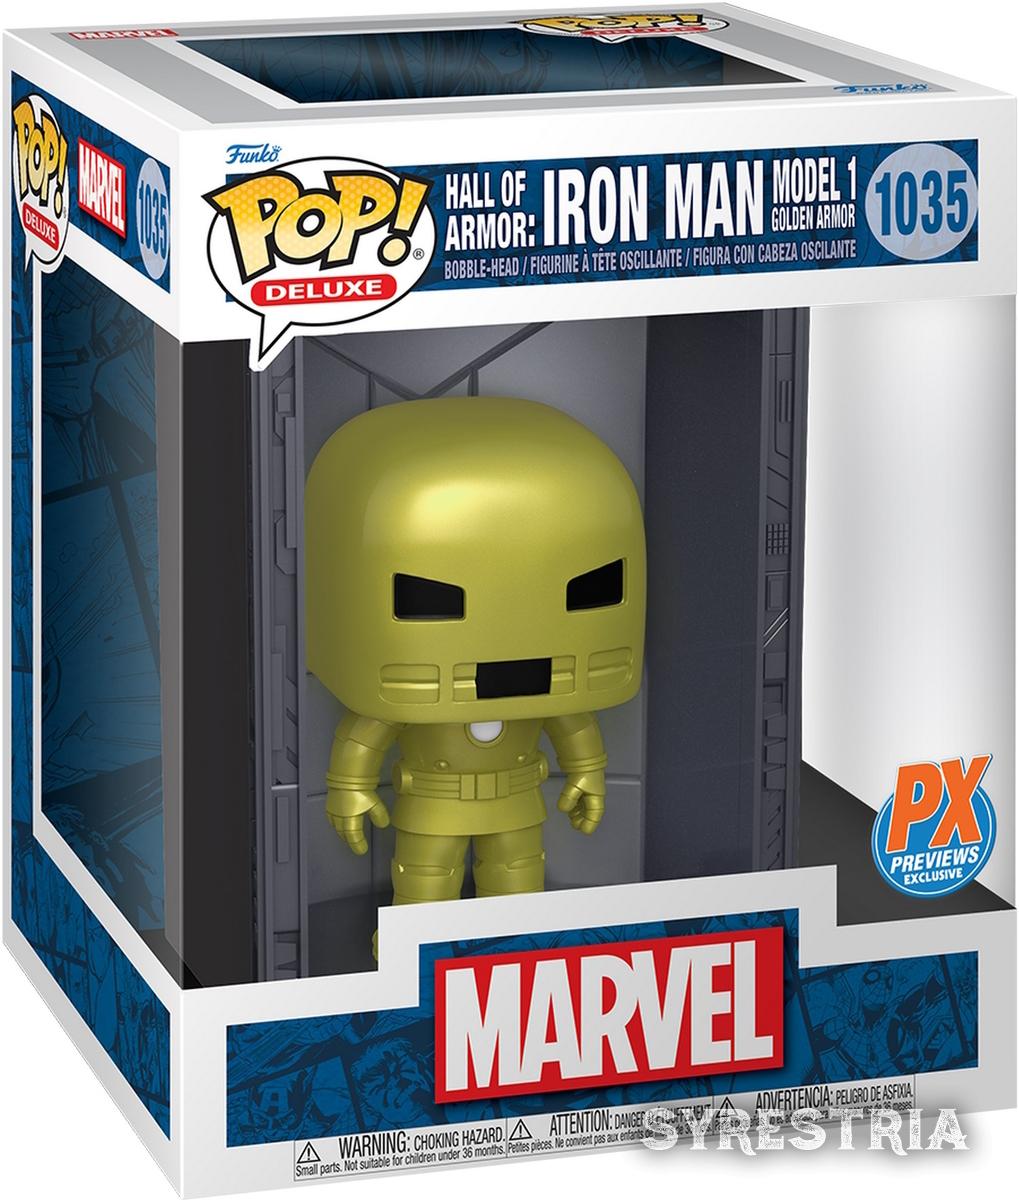 Marvel - Hall Of Armor Iron Man Model 1 Silver Golden Armor 1035 PX Previews Exclusive - Funko Pop! Deluxe